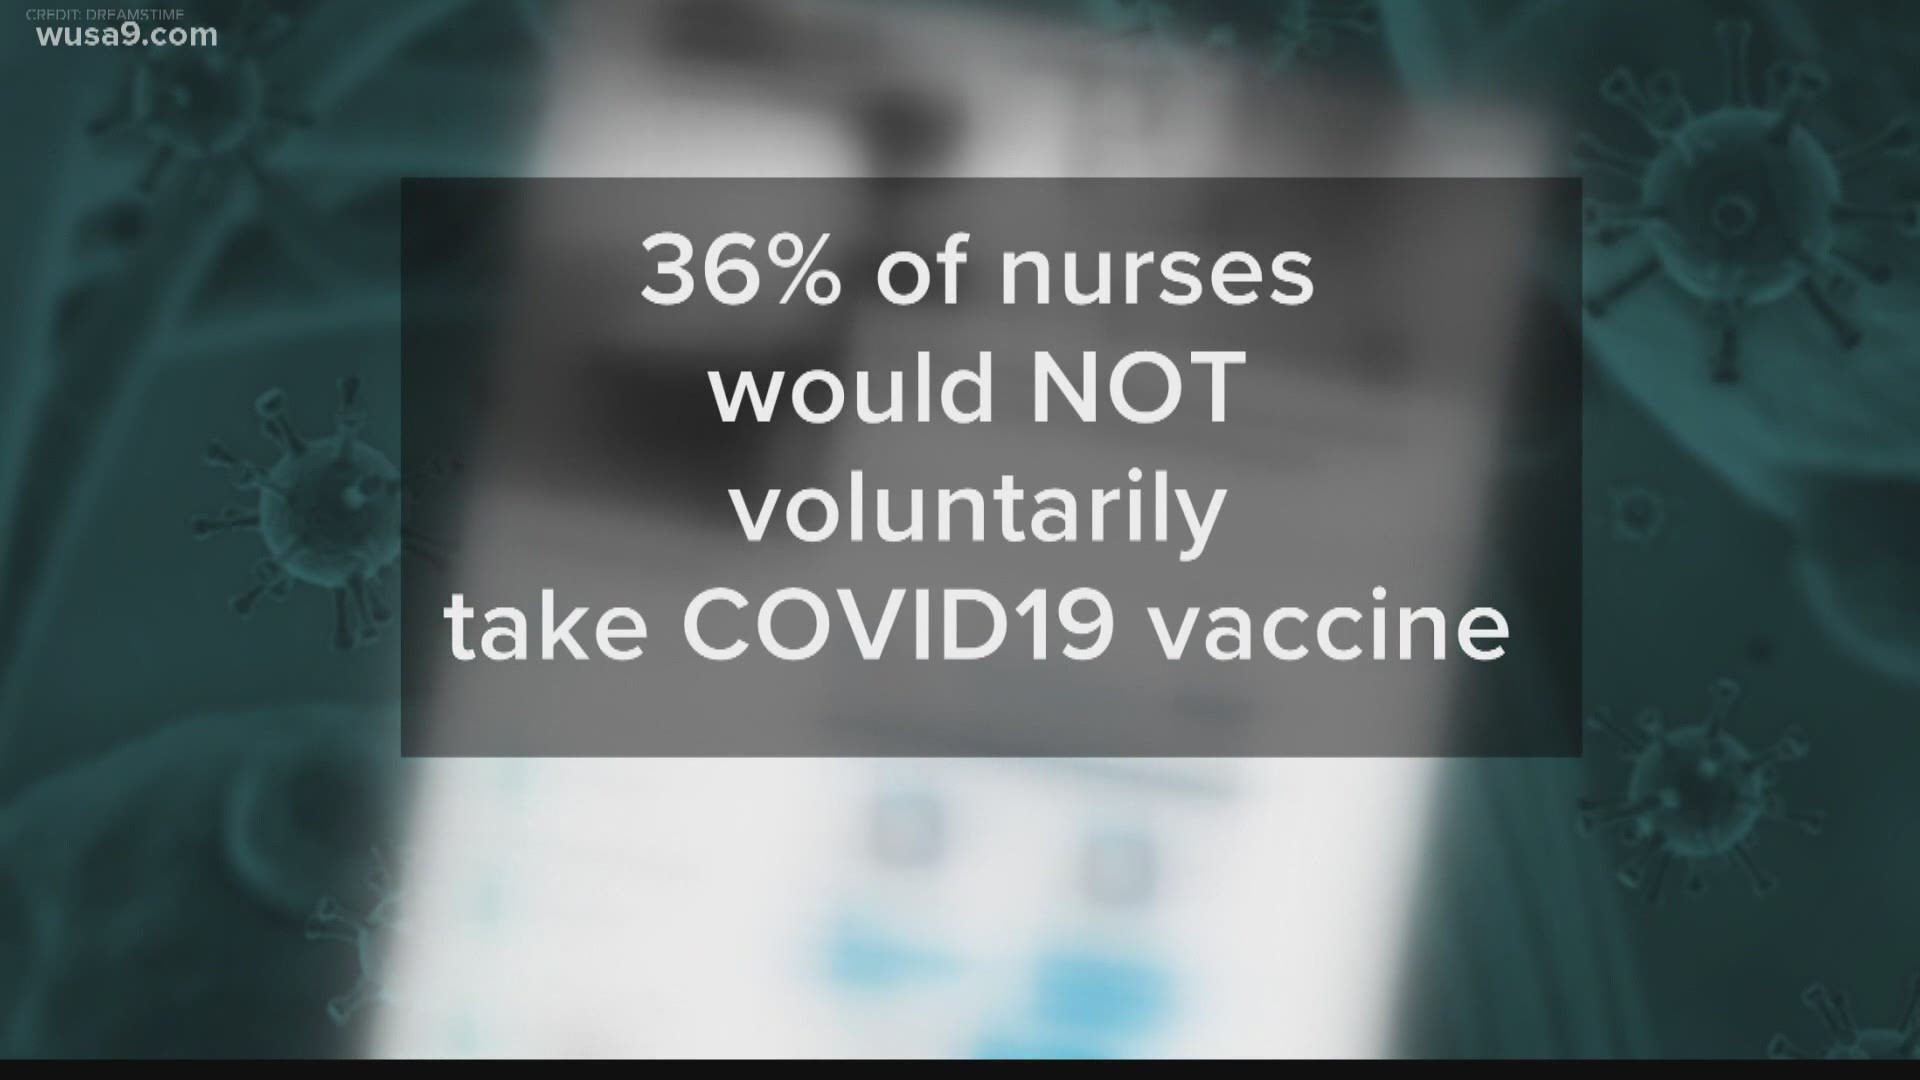 Majority of health care workers are on board to get the vaccine but some are still hesitant.